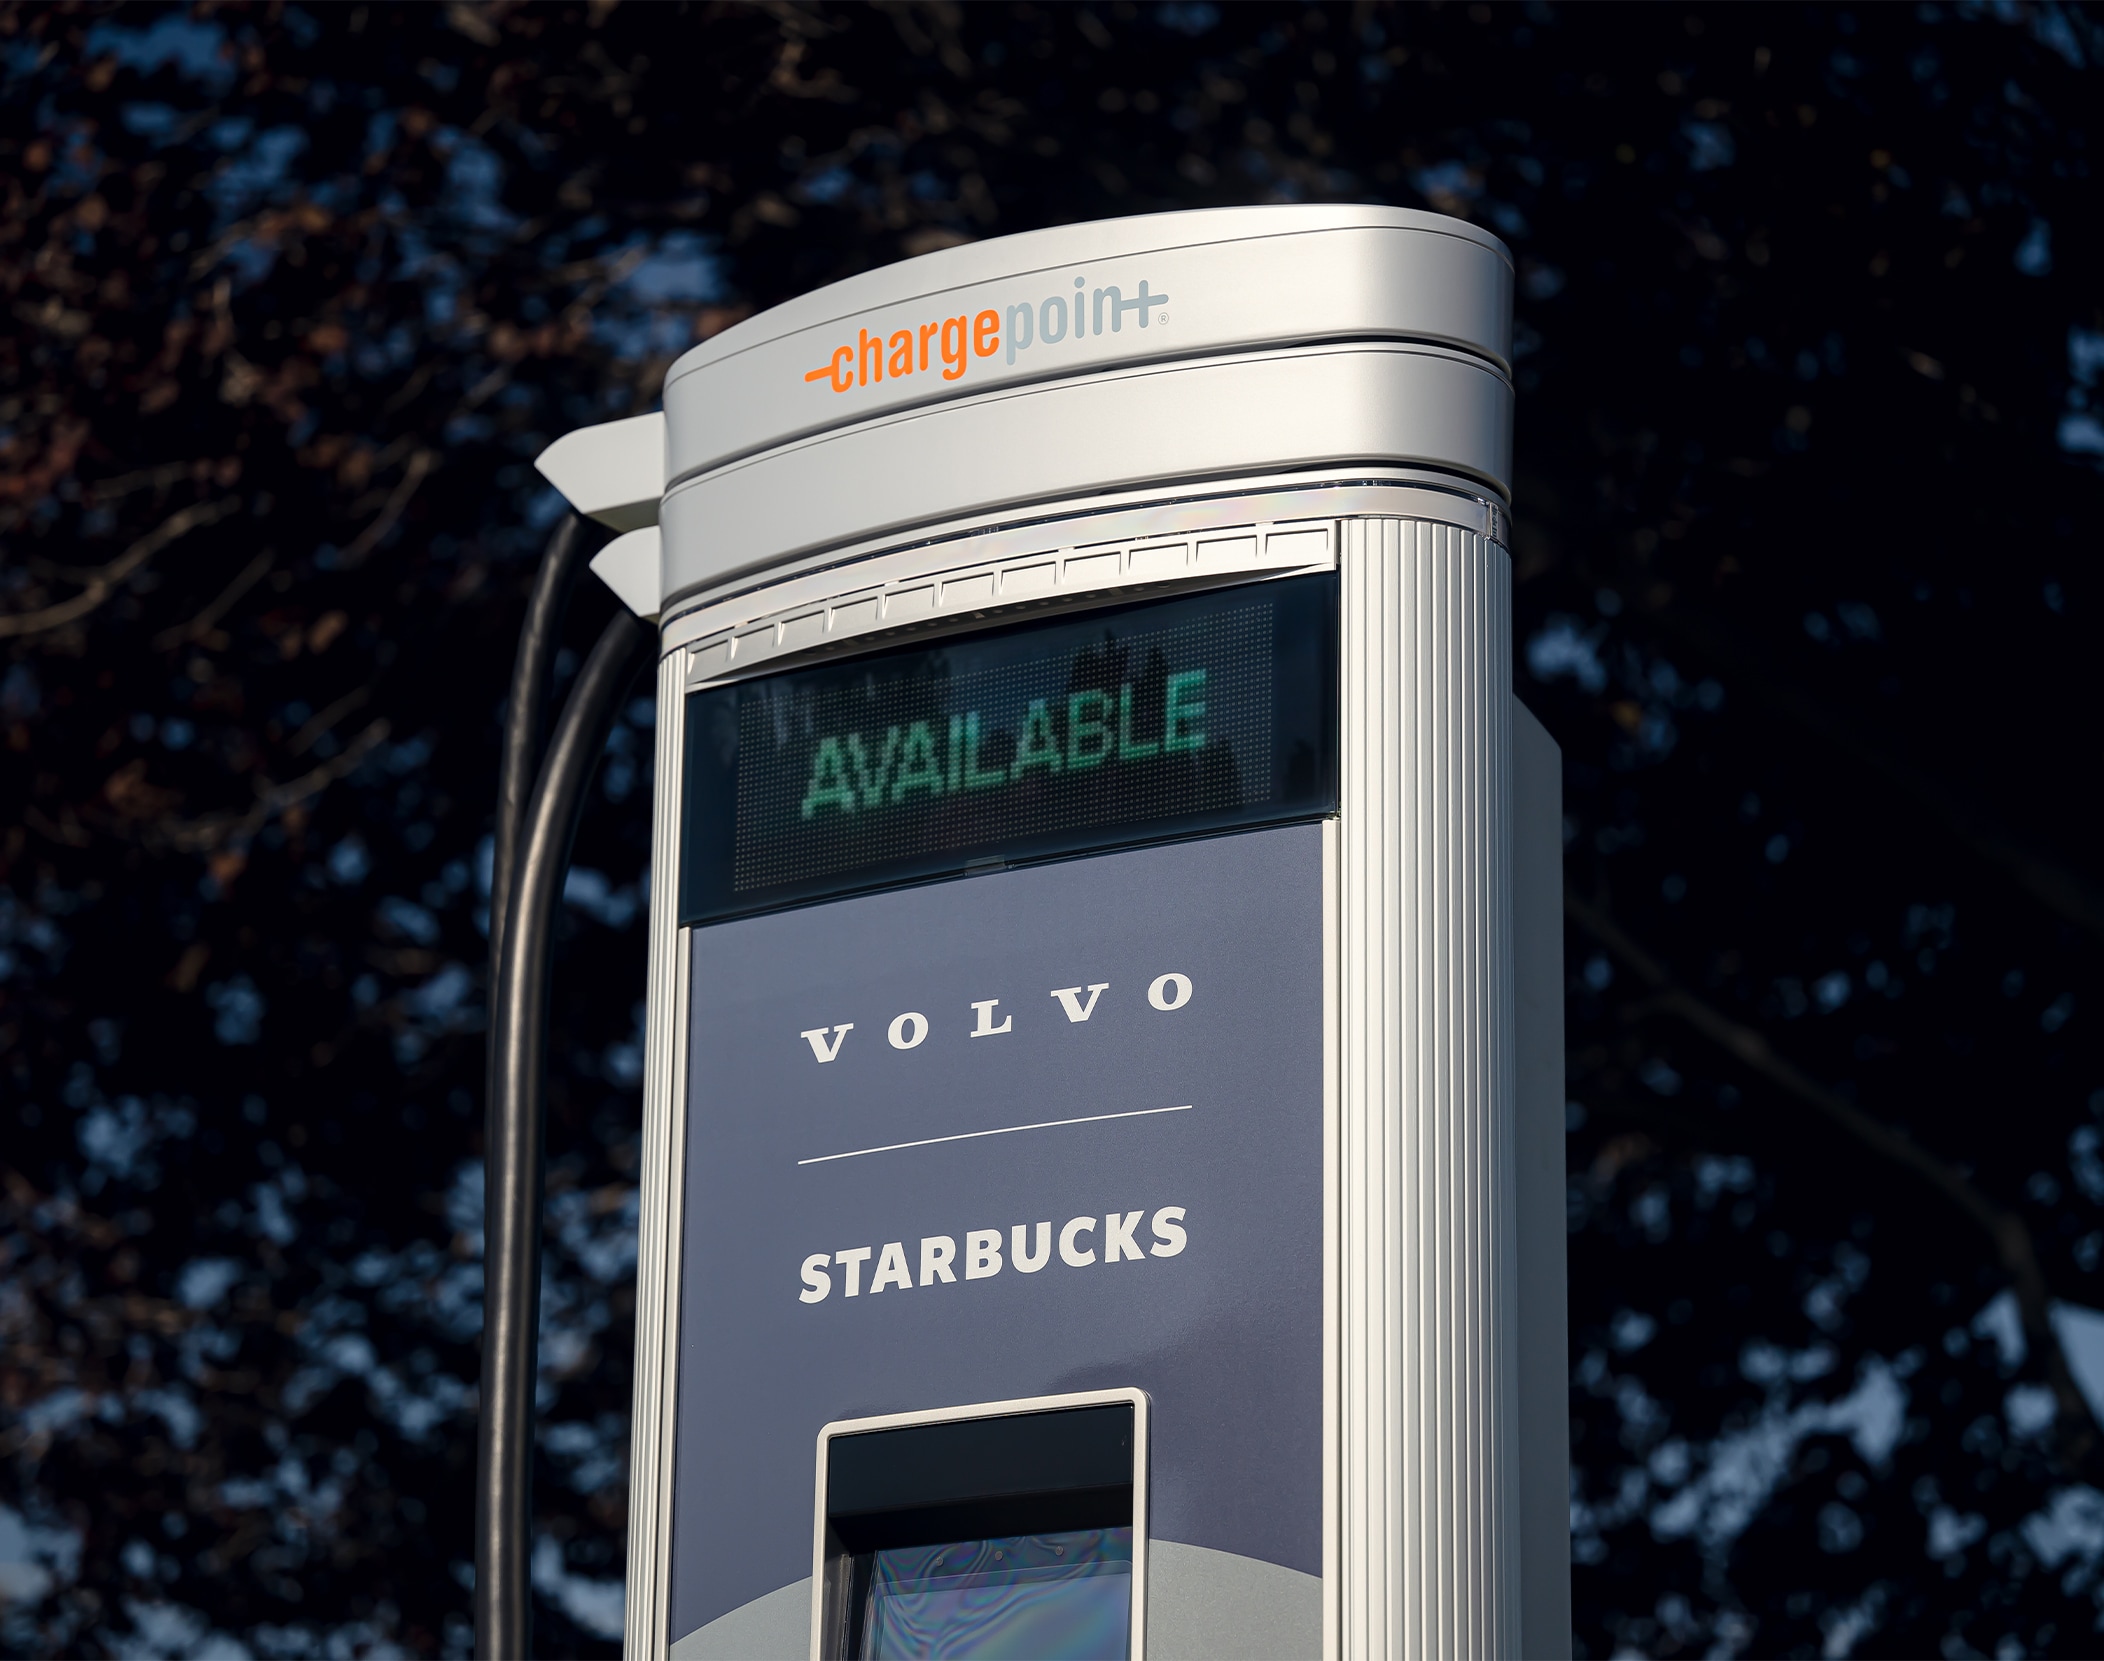 Volvo ChargePoint Starbucks - EV charging station